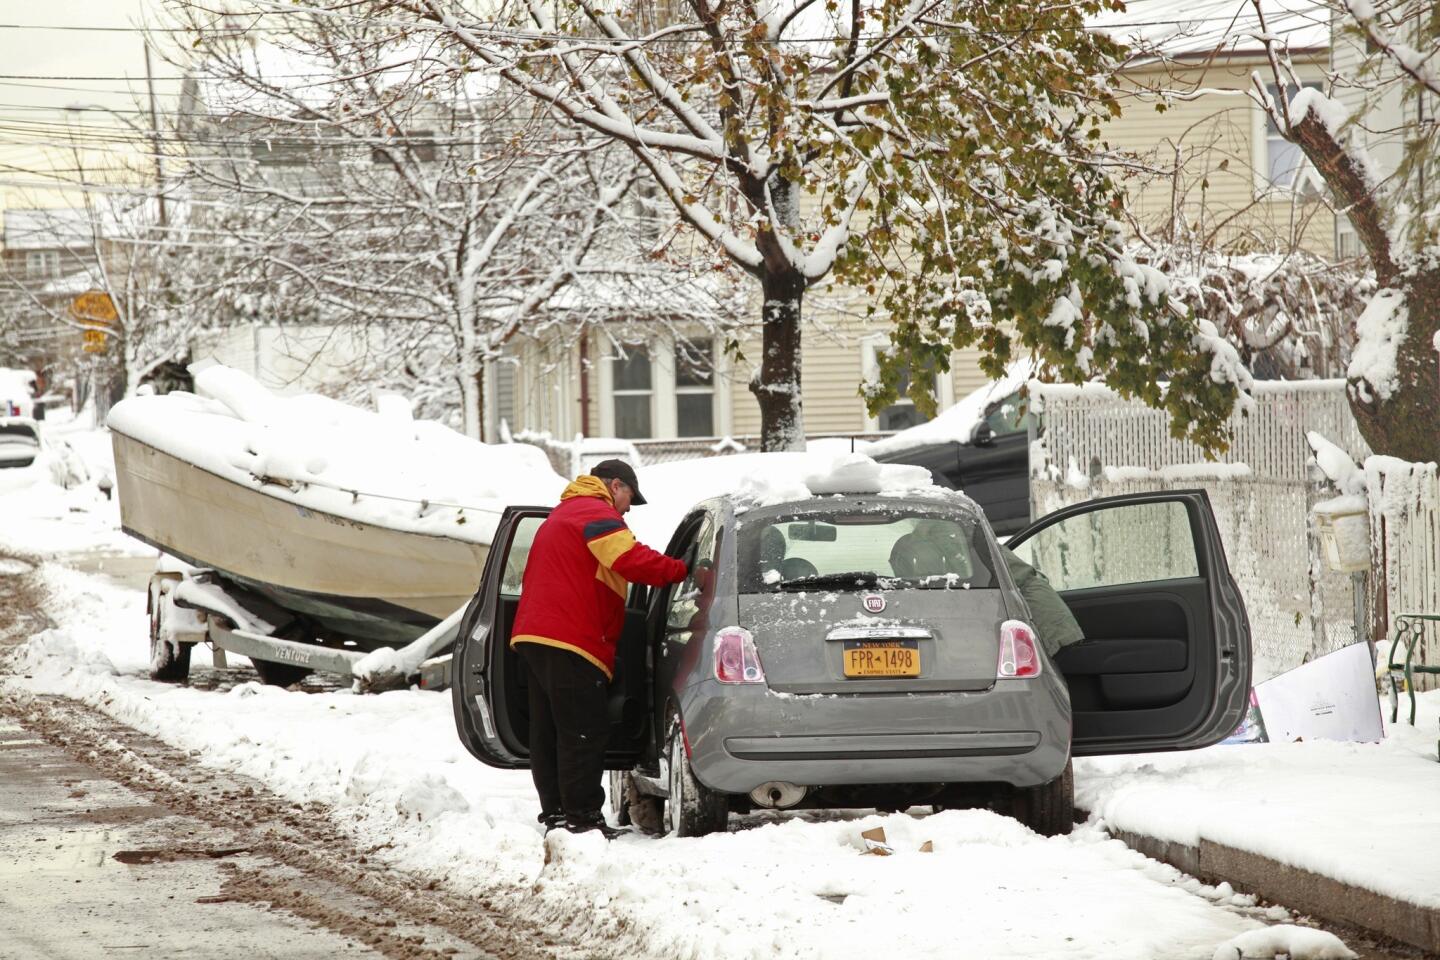 In the neighborhood of New Dorp in Staten Island, N.Y., 3 to 4 inches of snow blanketed the area, making the cleanup effort from super storm Sandy that much more difficult. Most residents have left because of lack of electricity and services.